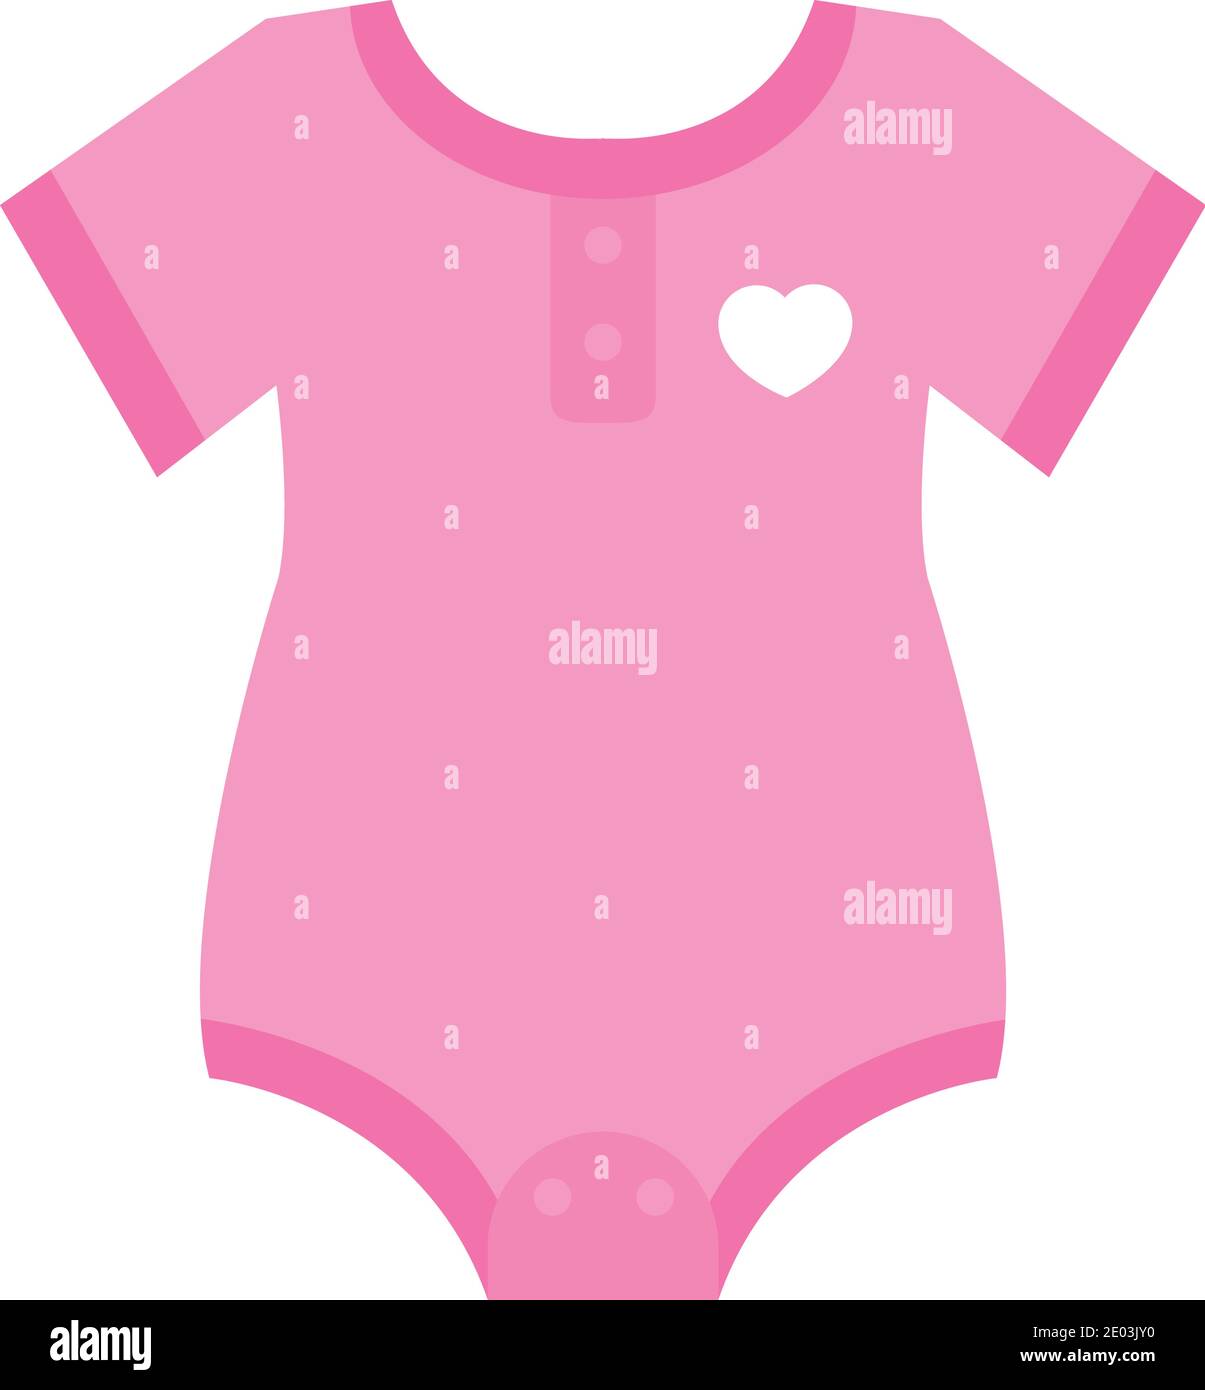 pink baby clothing with heart icon over white background, flat style ...